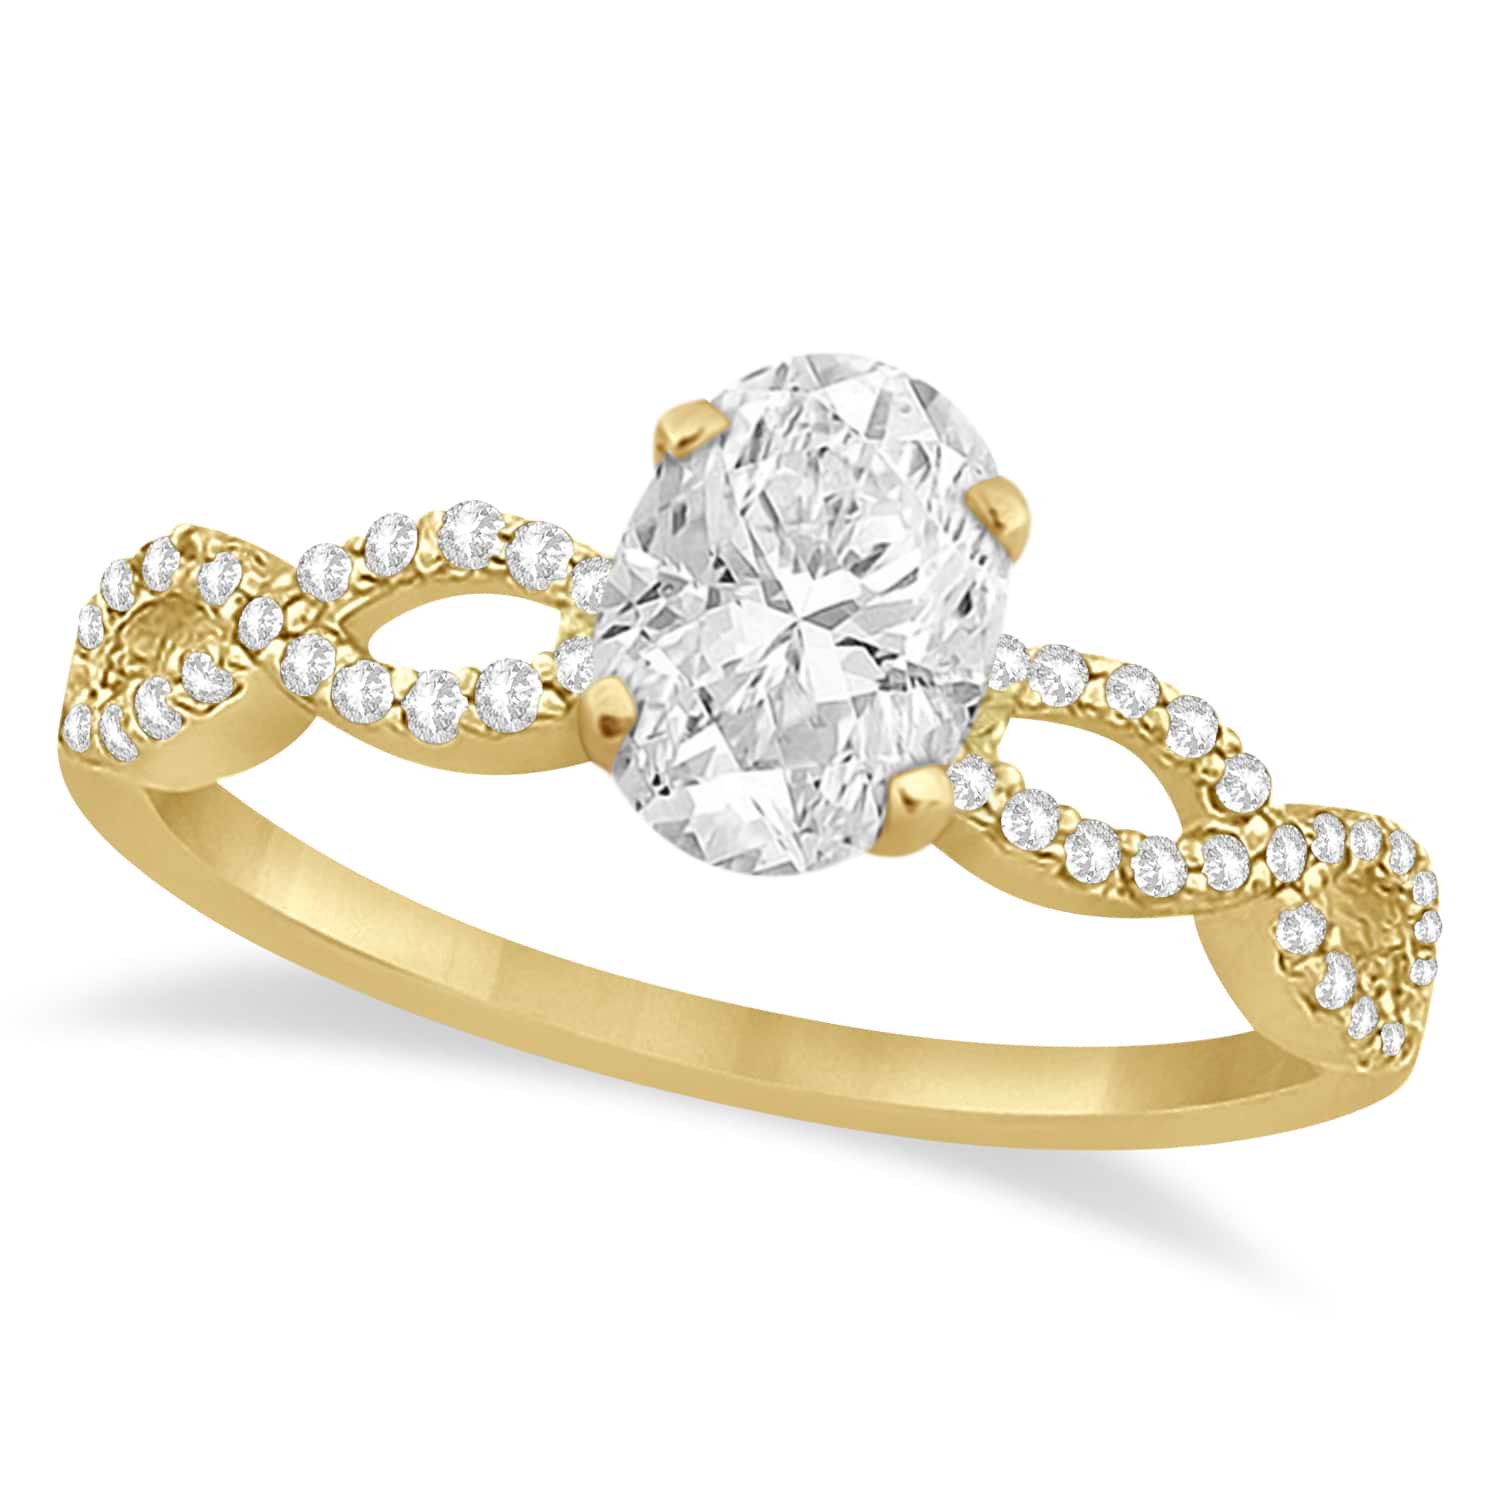 Twisted Infinity Oval Diamond Engagement Ring 14k Yellow Gold (1.50ct)